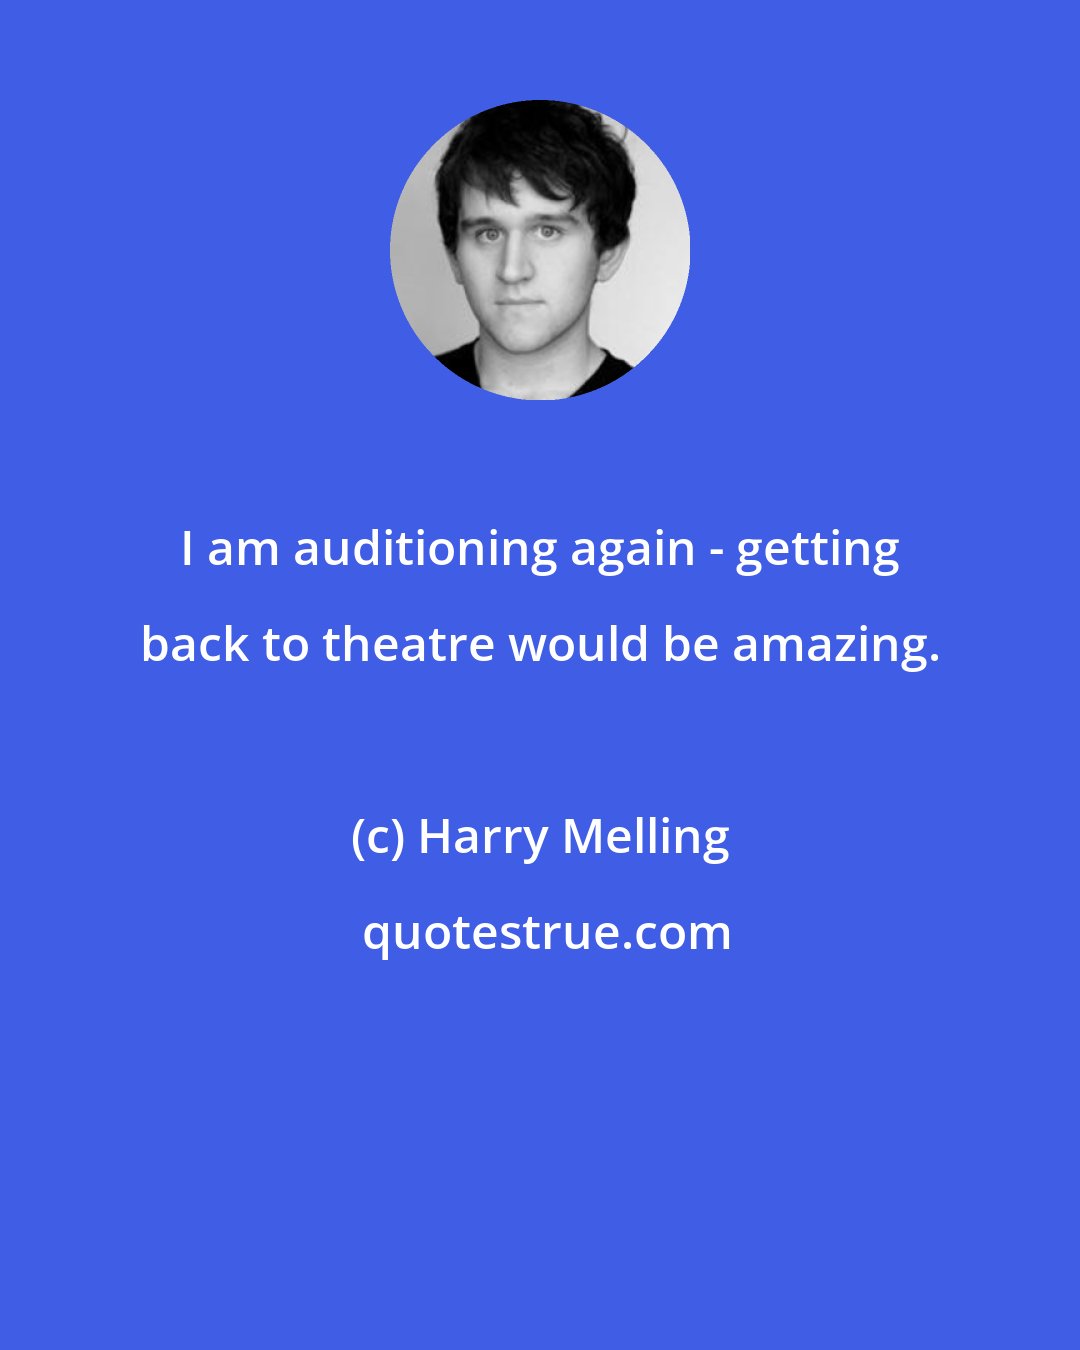 Harry Melling: I am auditioning again - getting back to theatre would be amazing.